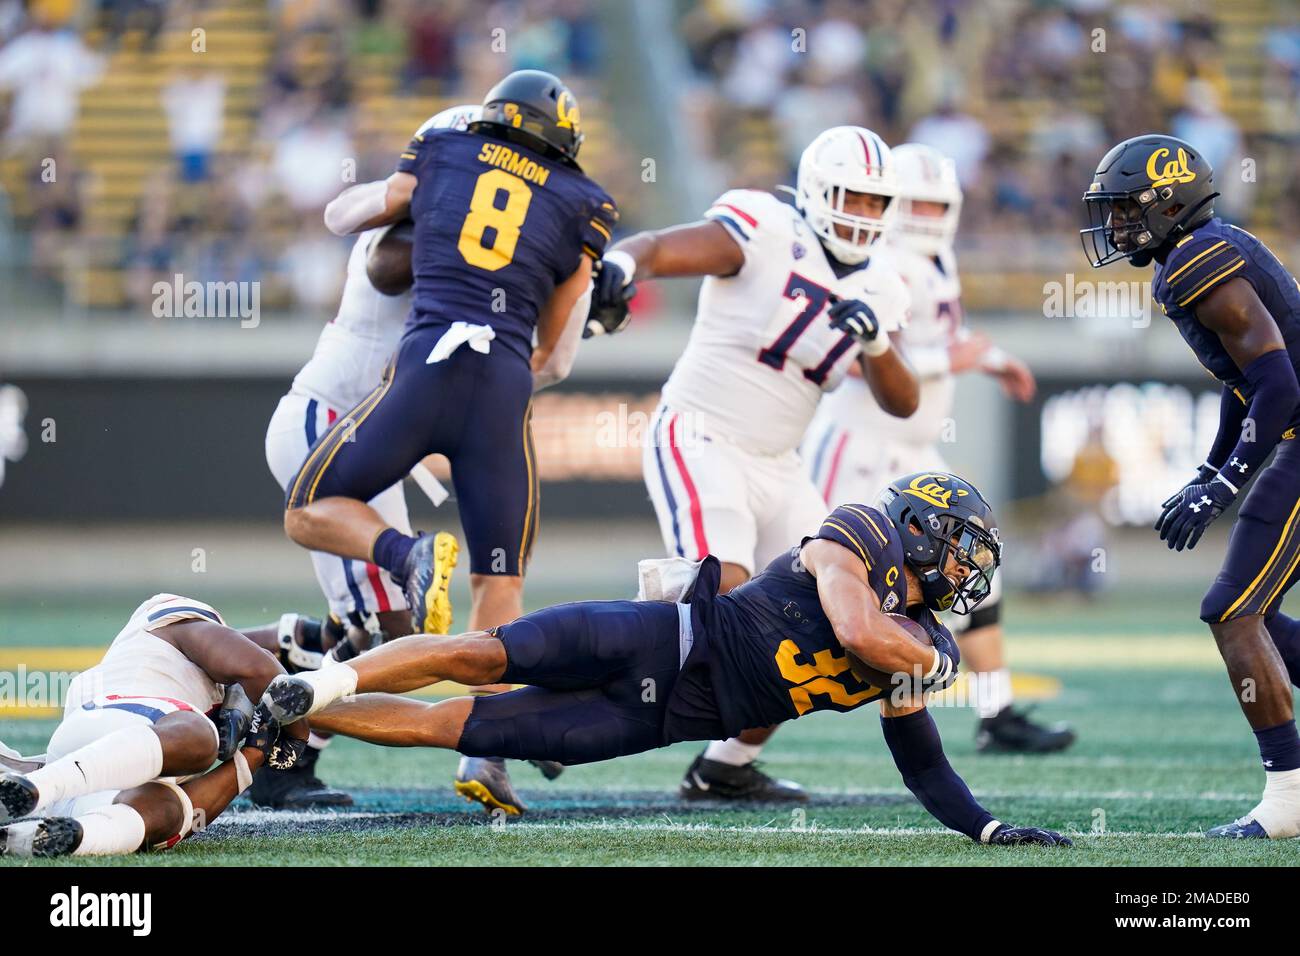 California safety Daniel Scott (32) is tackled after intercepting